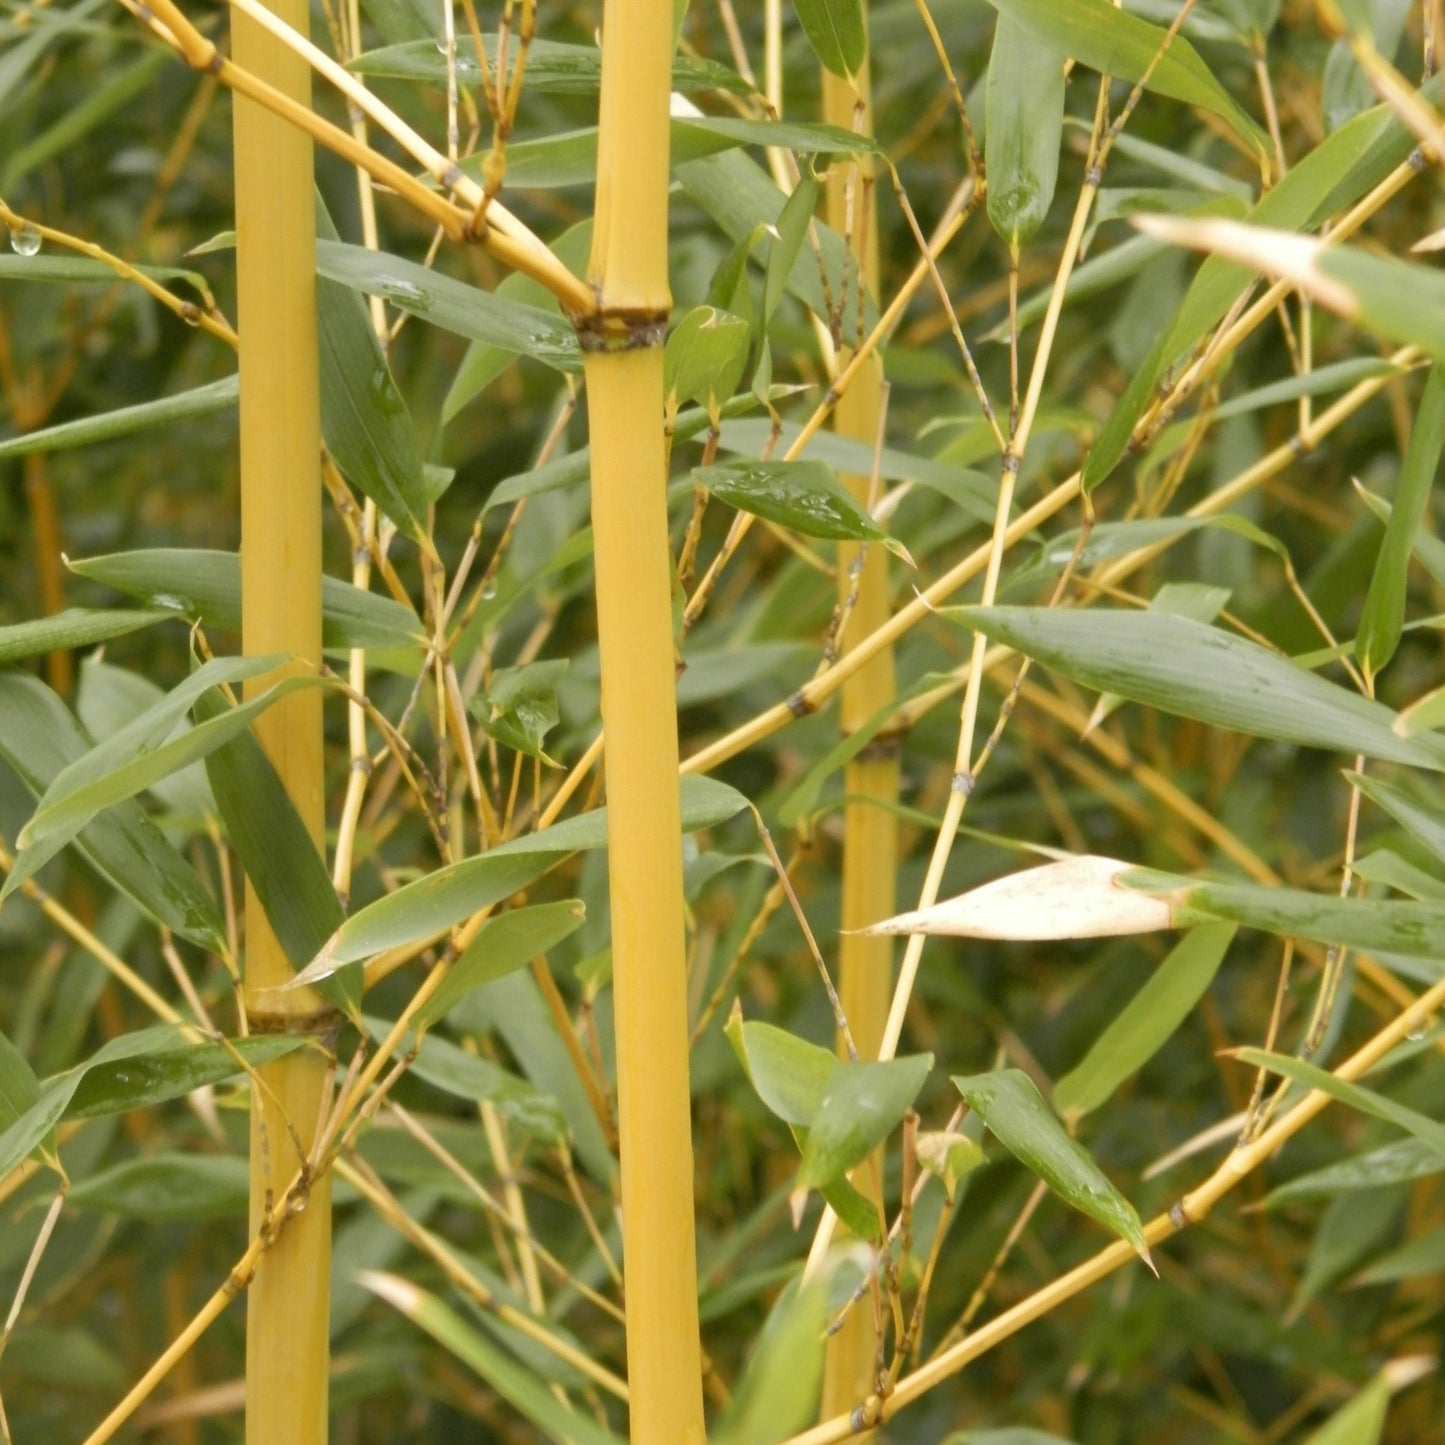 Upclose image of cane and foliage. bright yellow cane with green foliage. 